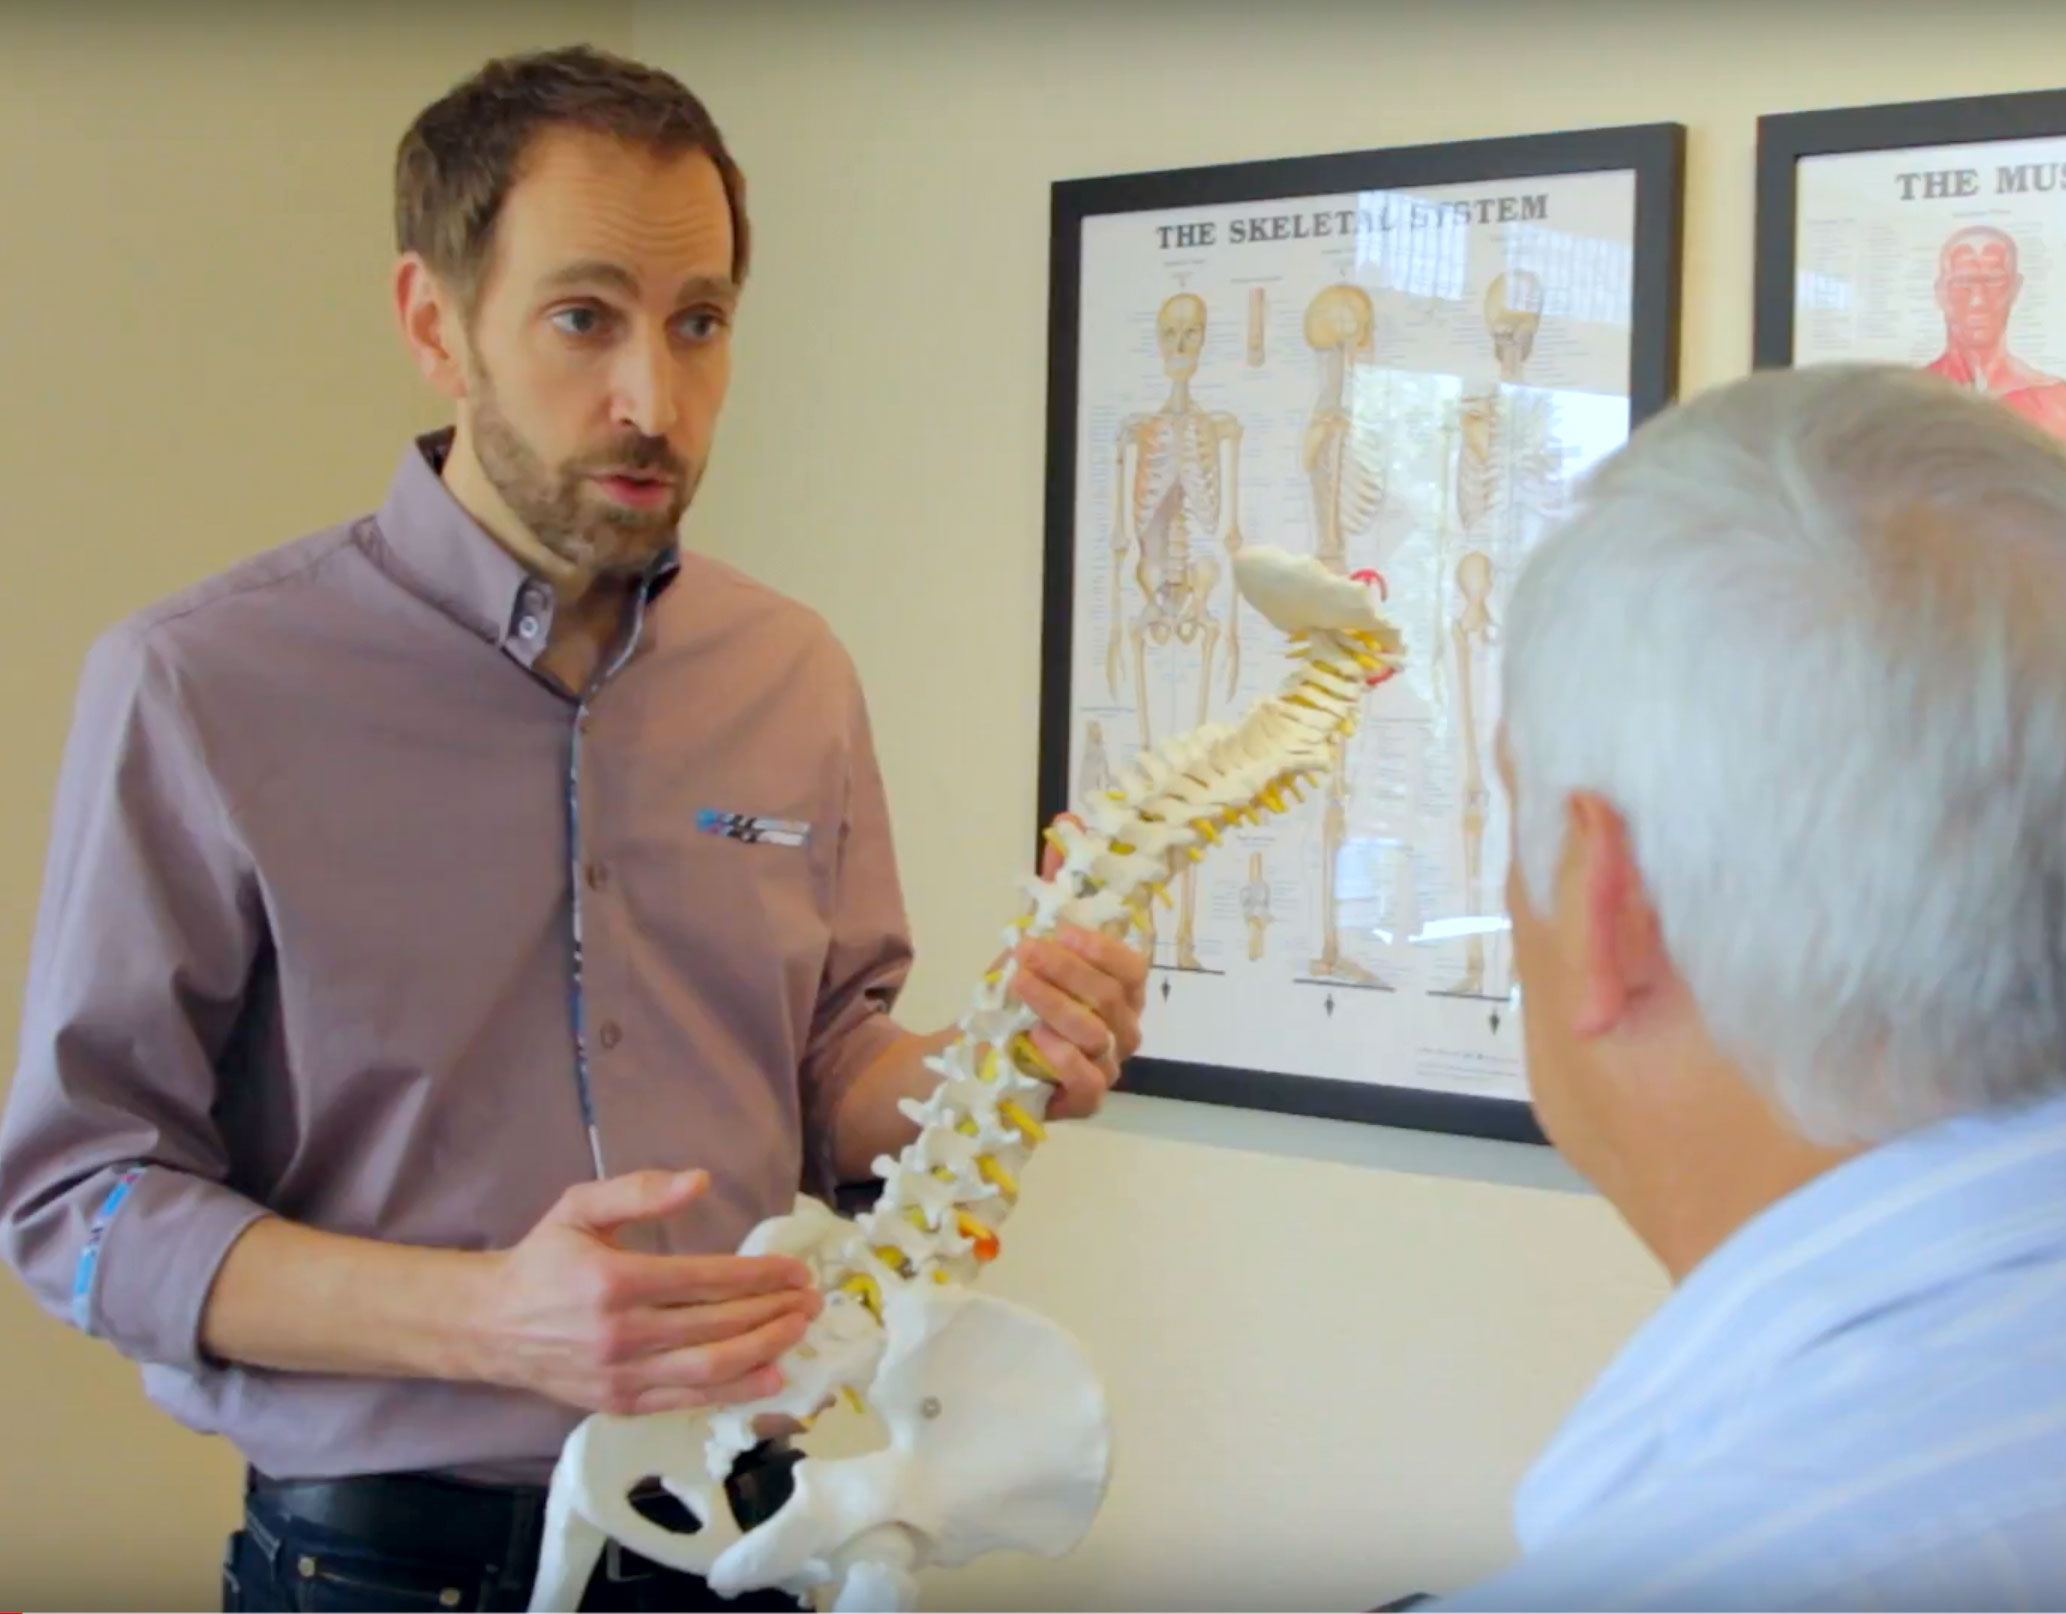 Dr. Rehl explaining to patient about conditions treated in office, including back and neck pain, sciatica, migraines, and more